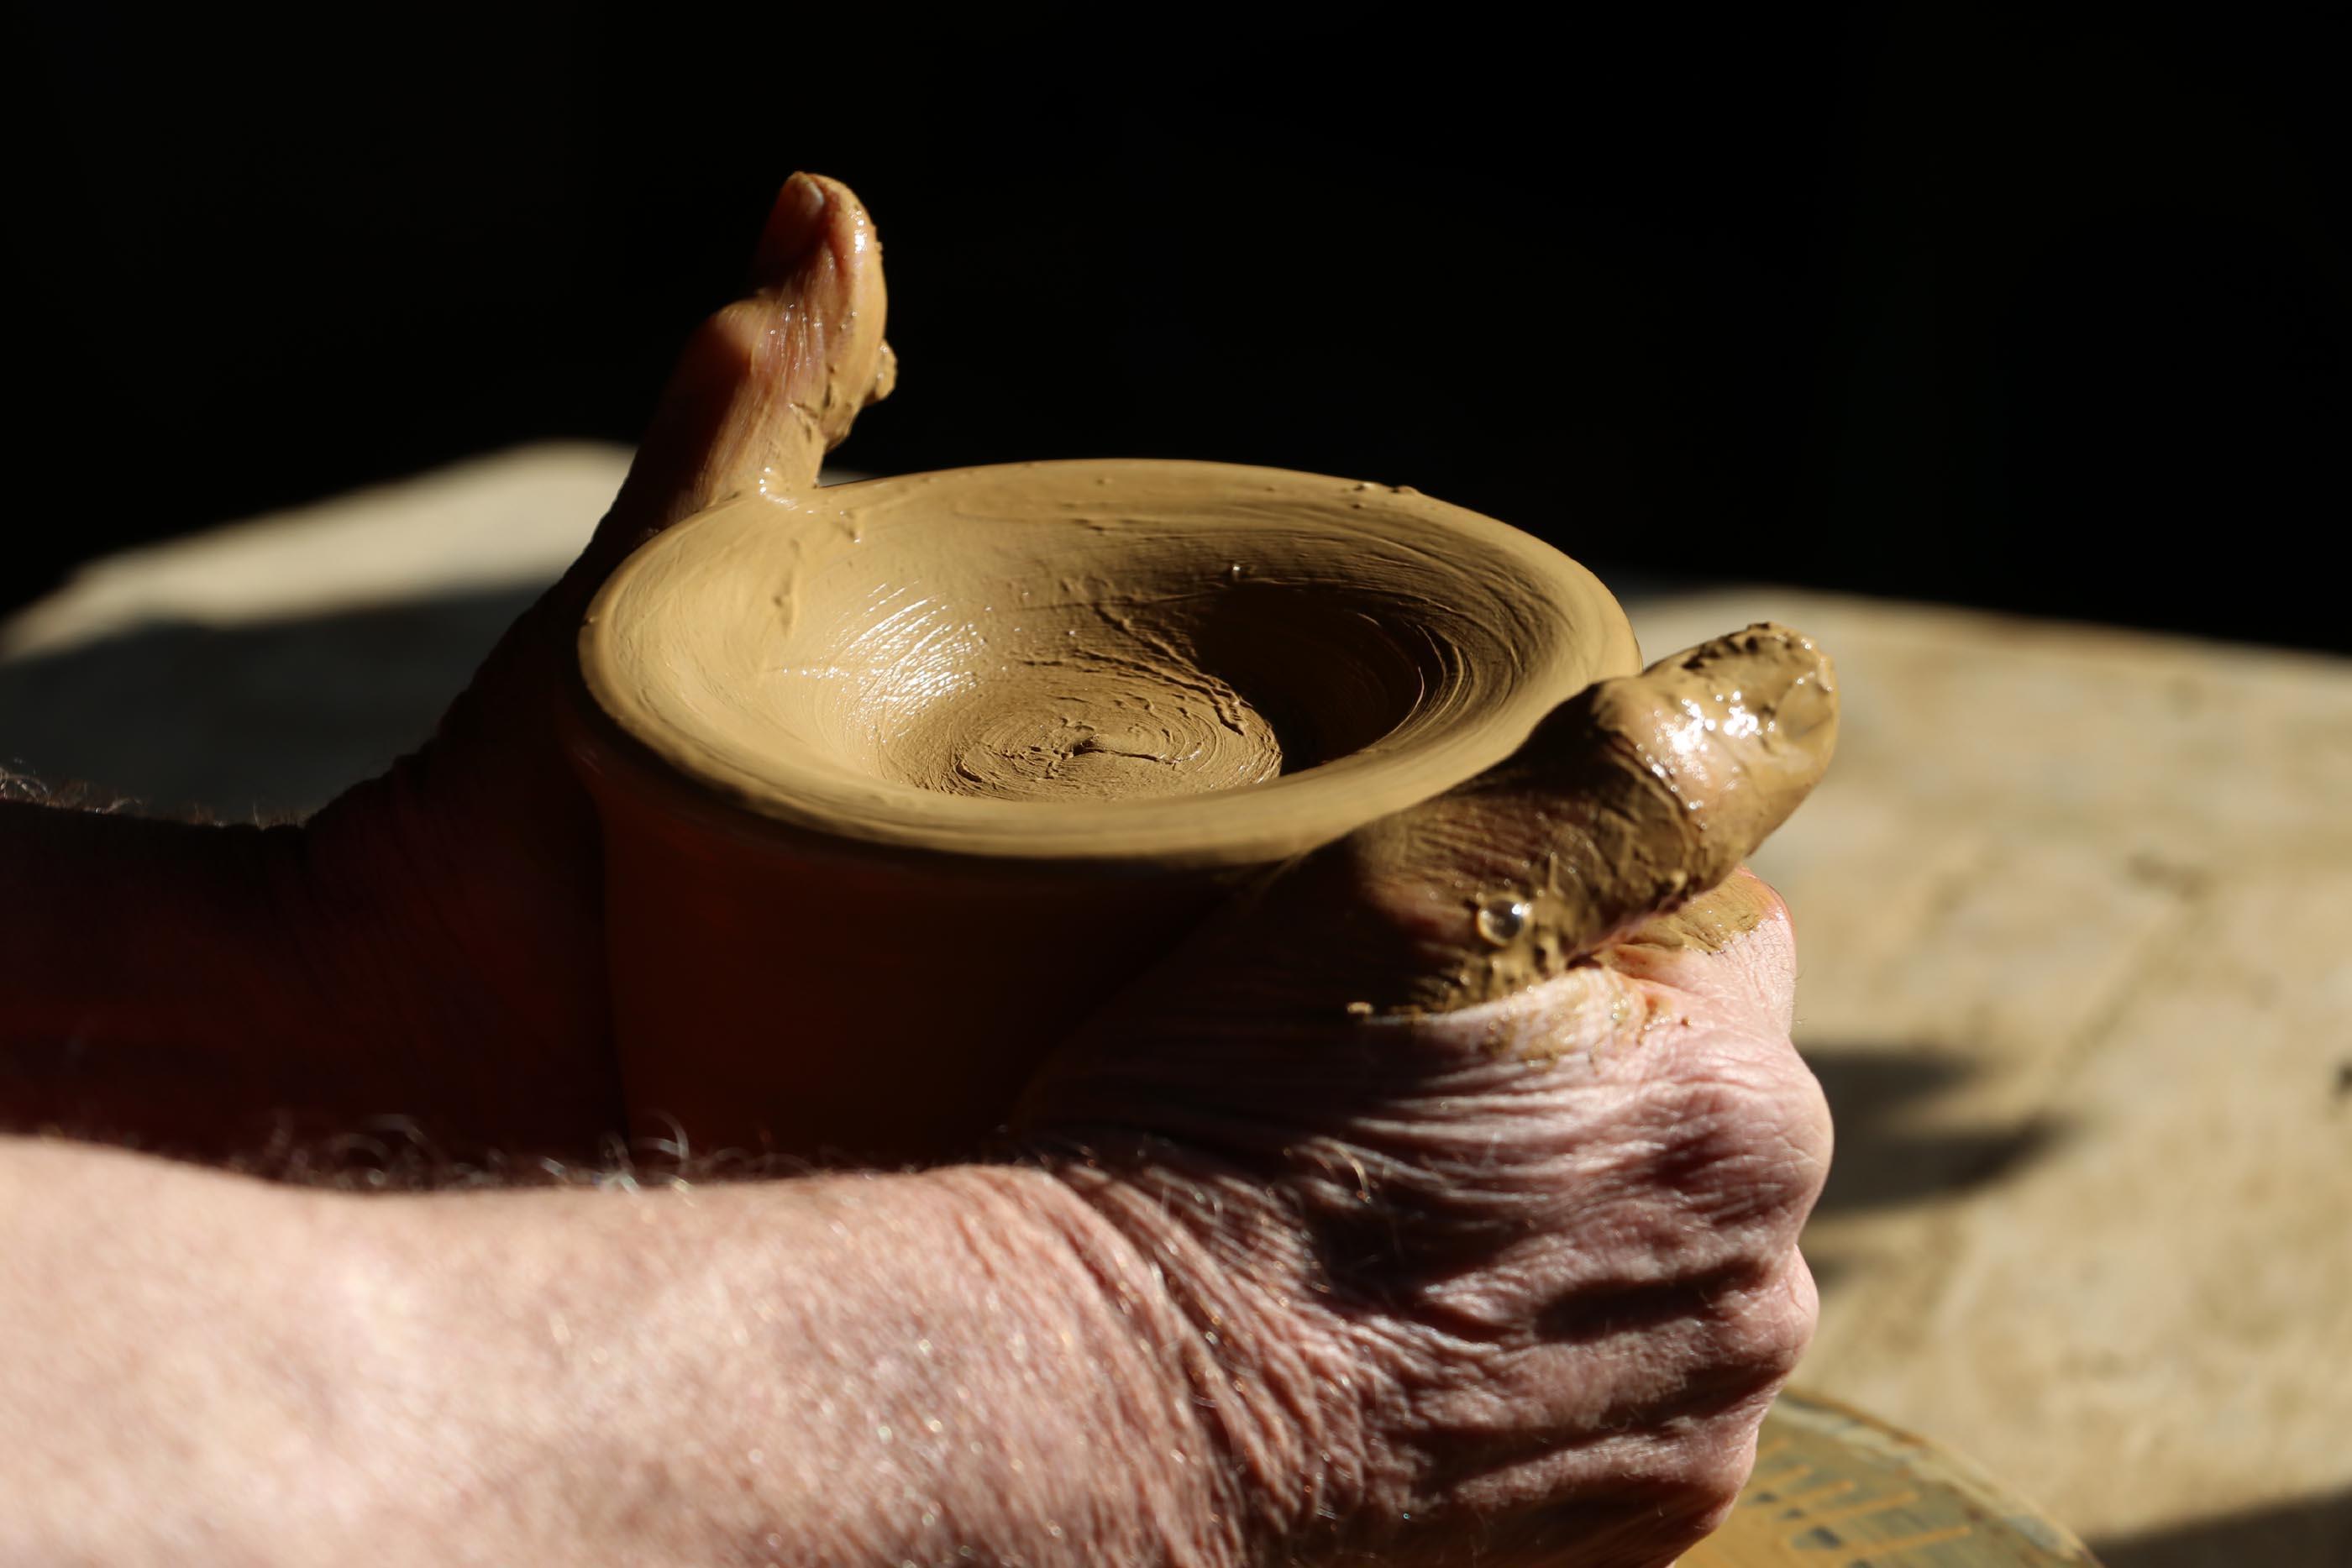 Dedicated 67 years of his life to pottery: Master Salim received the ‘Living Human Treasures’ award